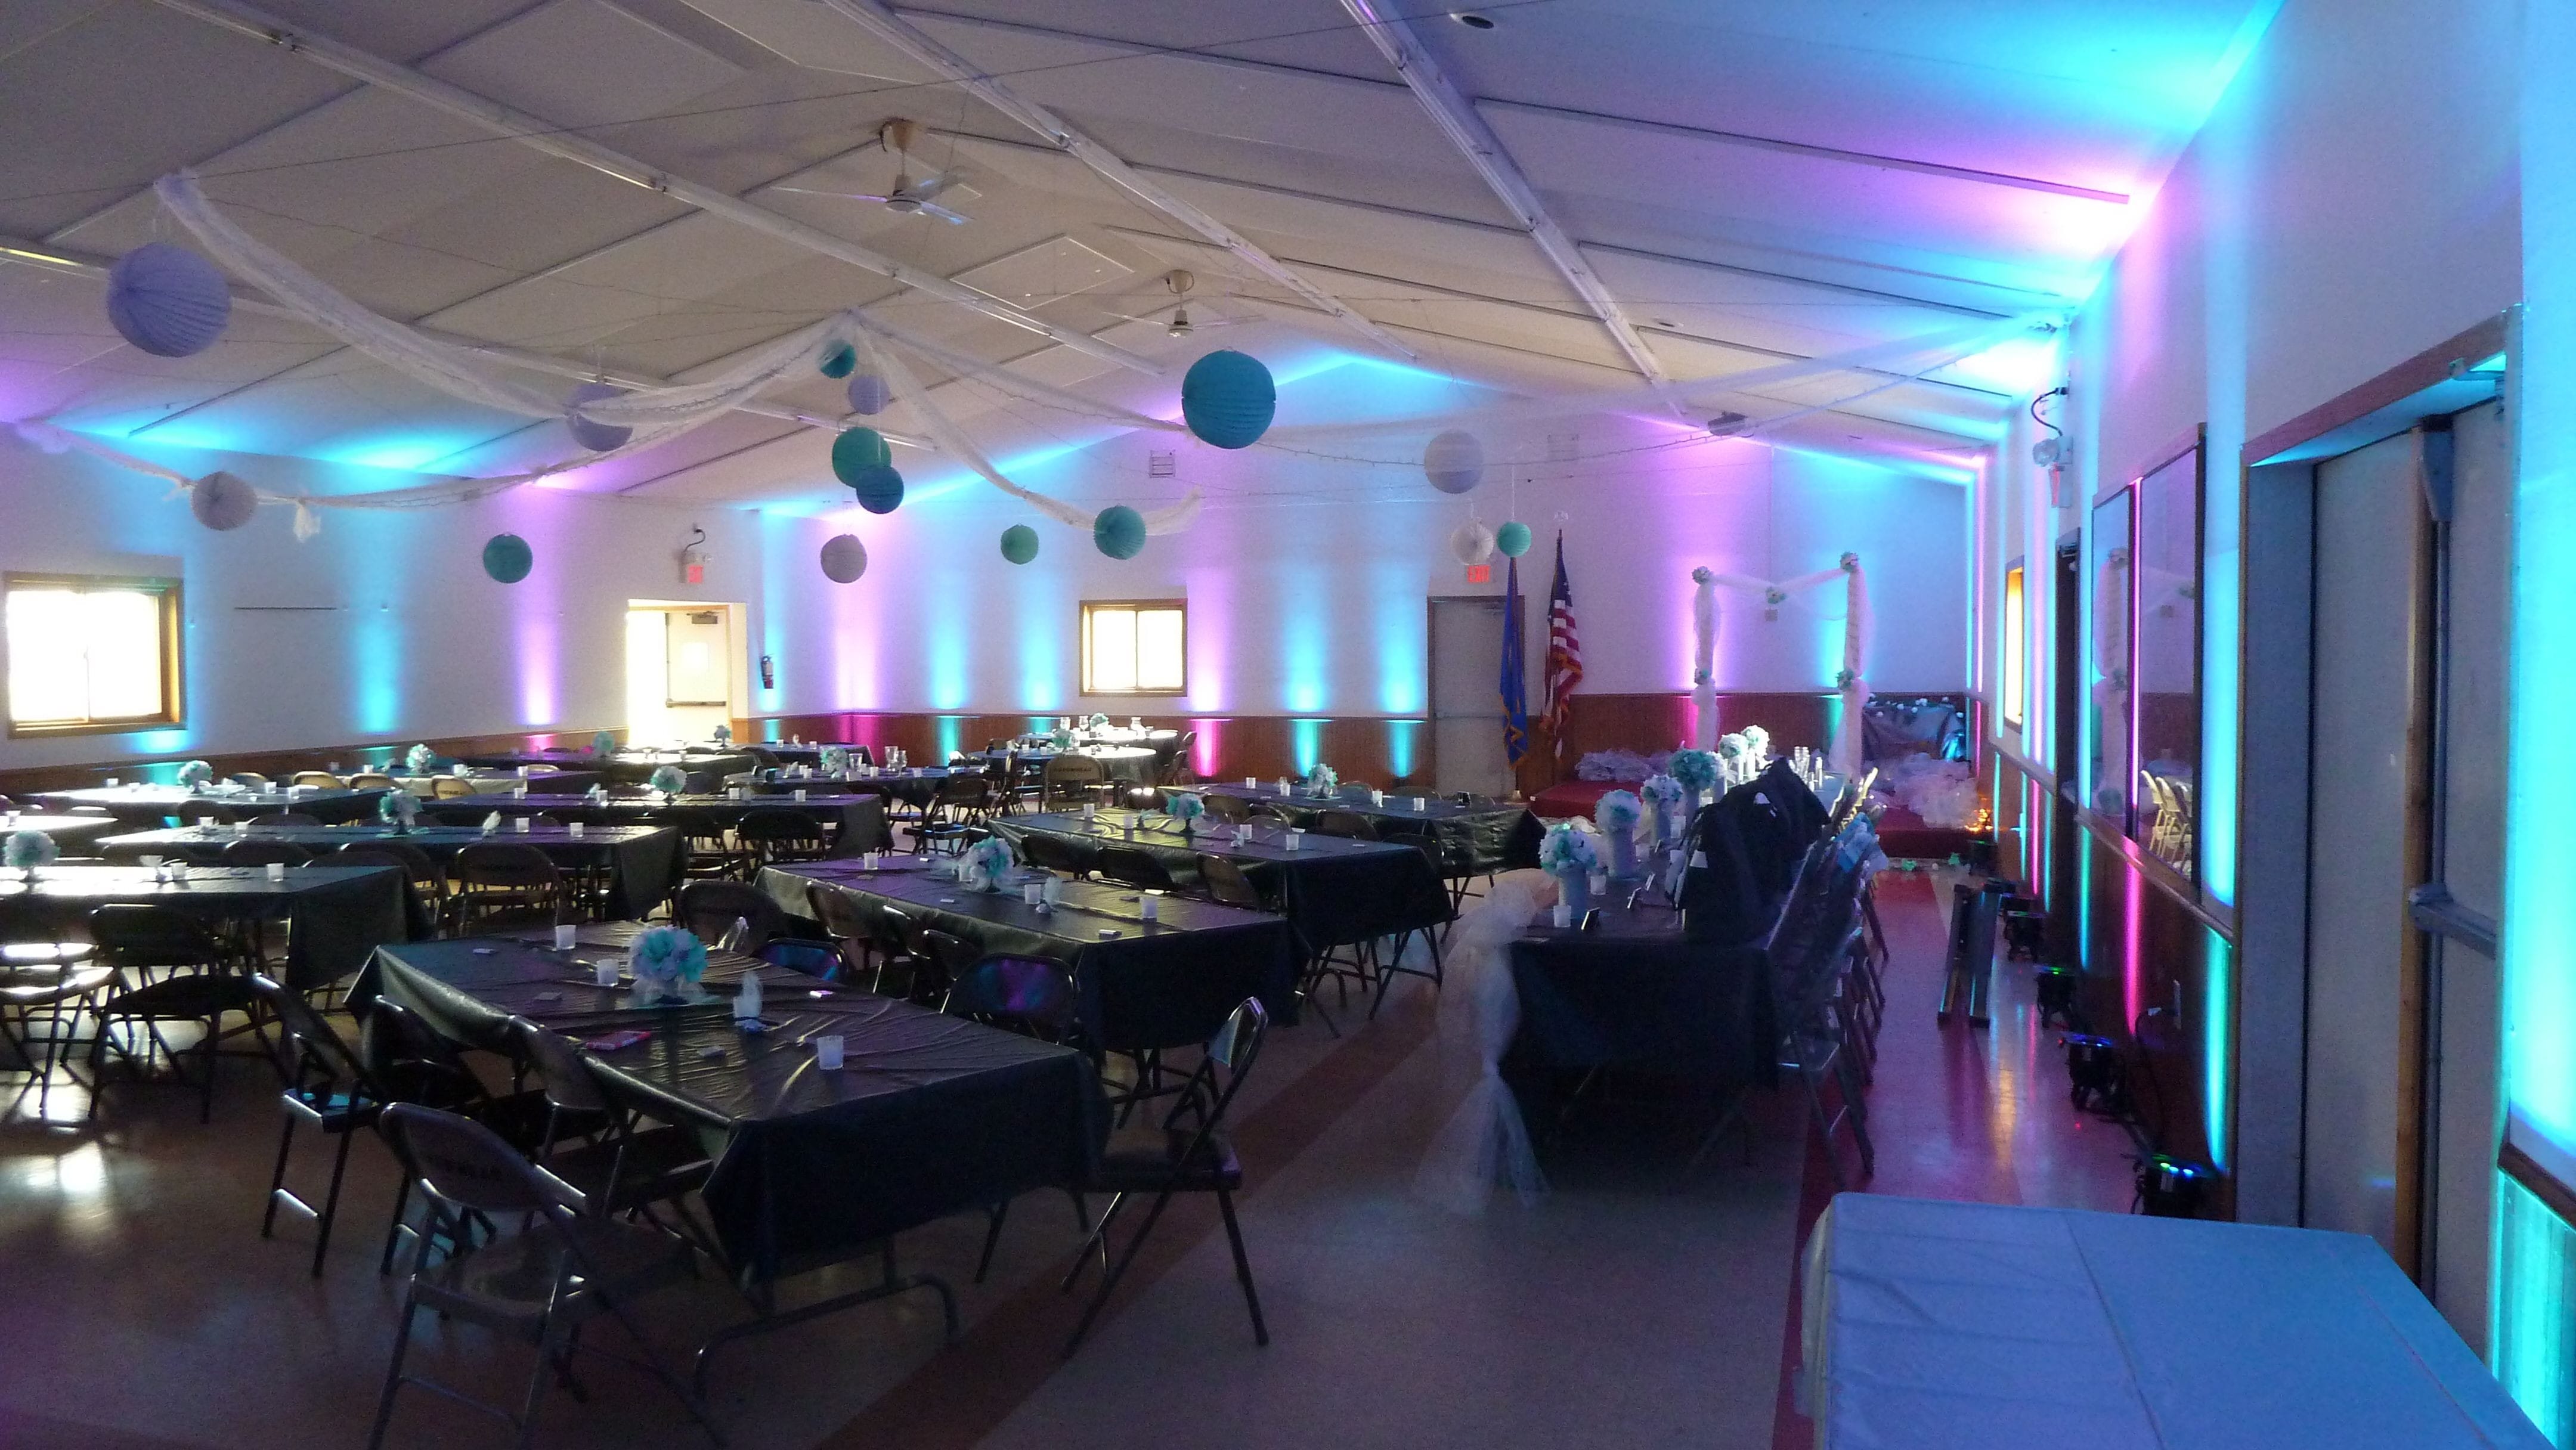 Wedding lighting in teal and magenta.